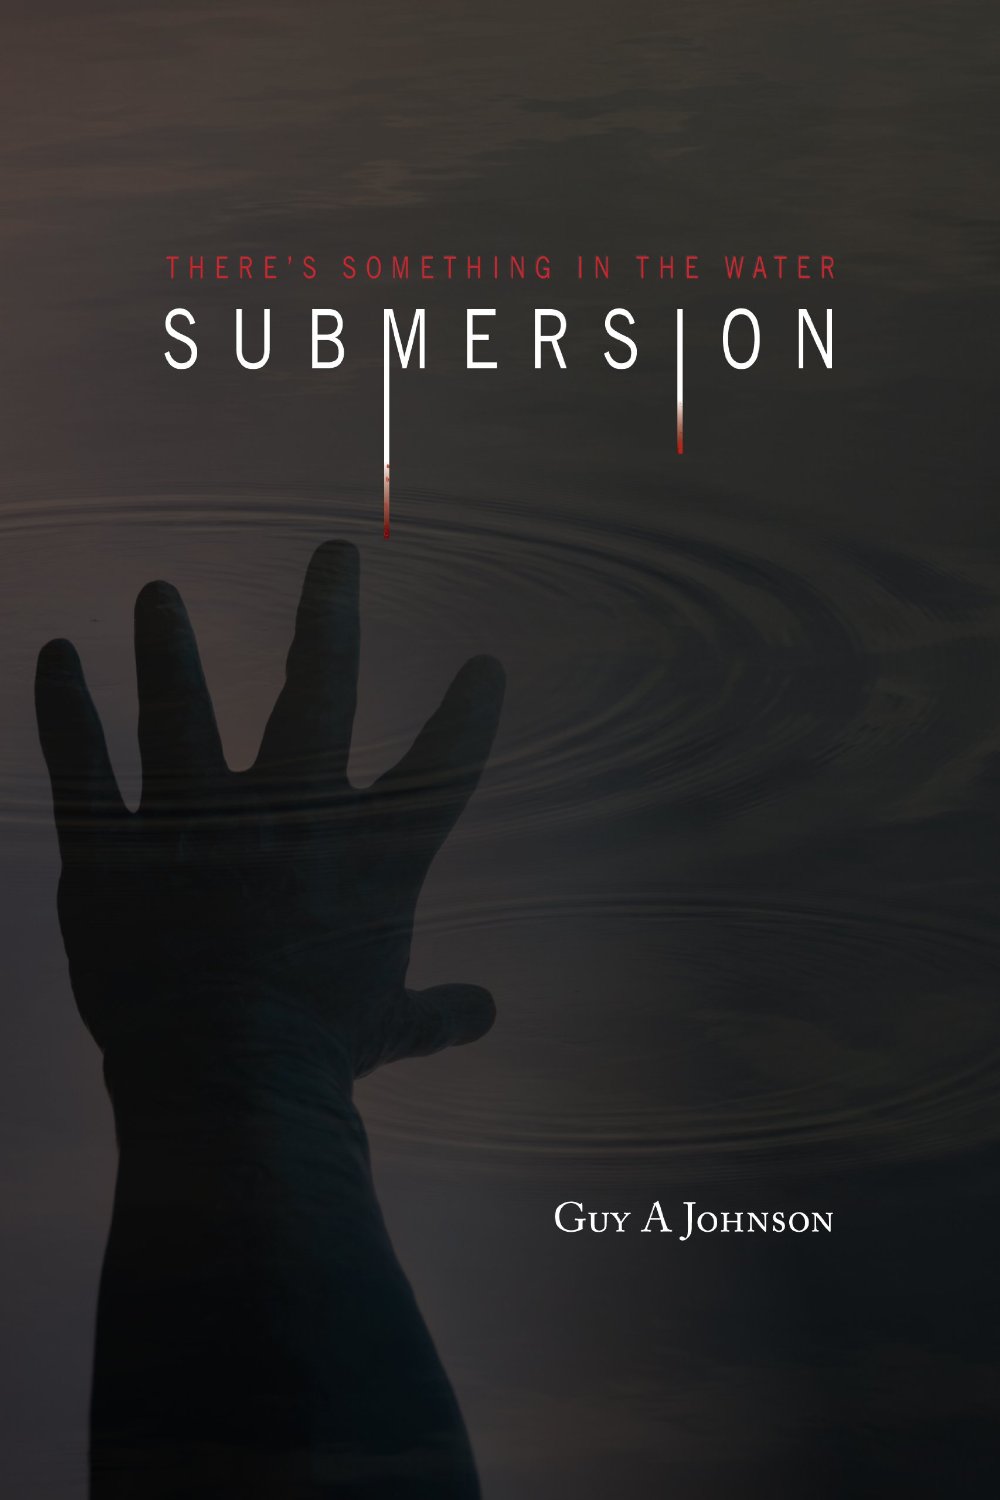 Submersion by Guy A